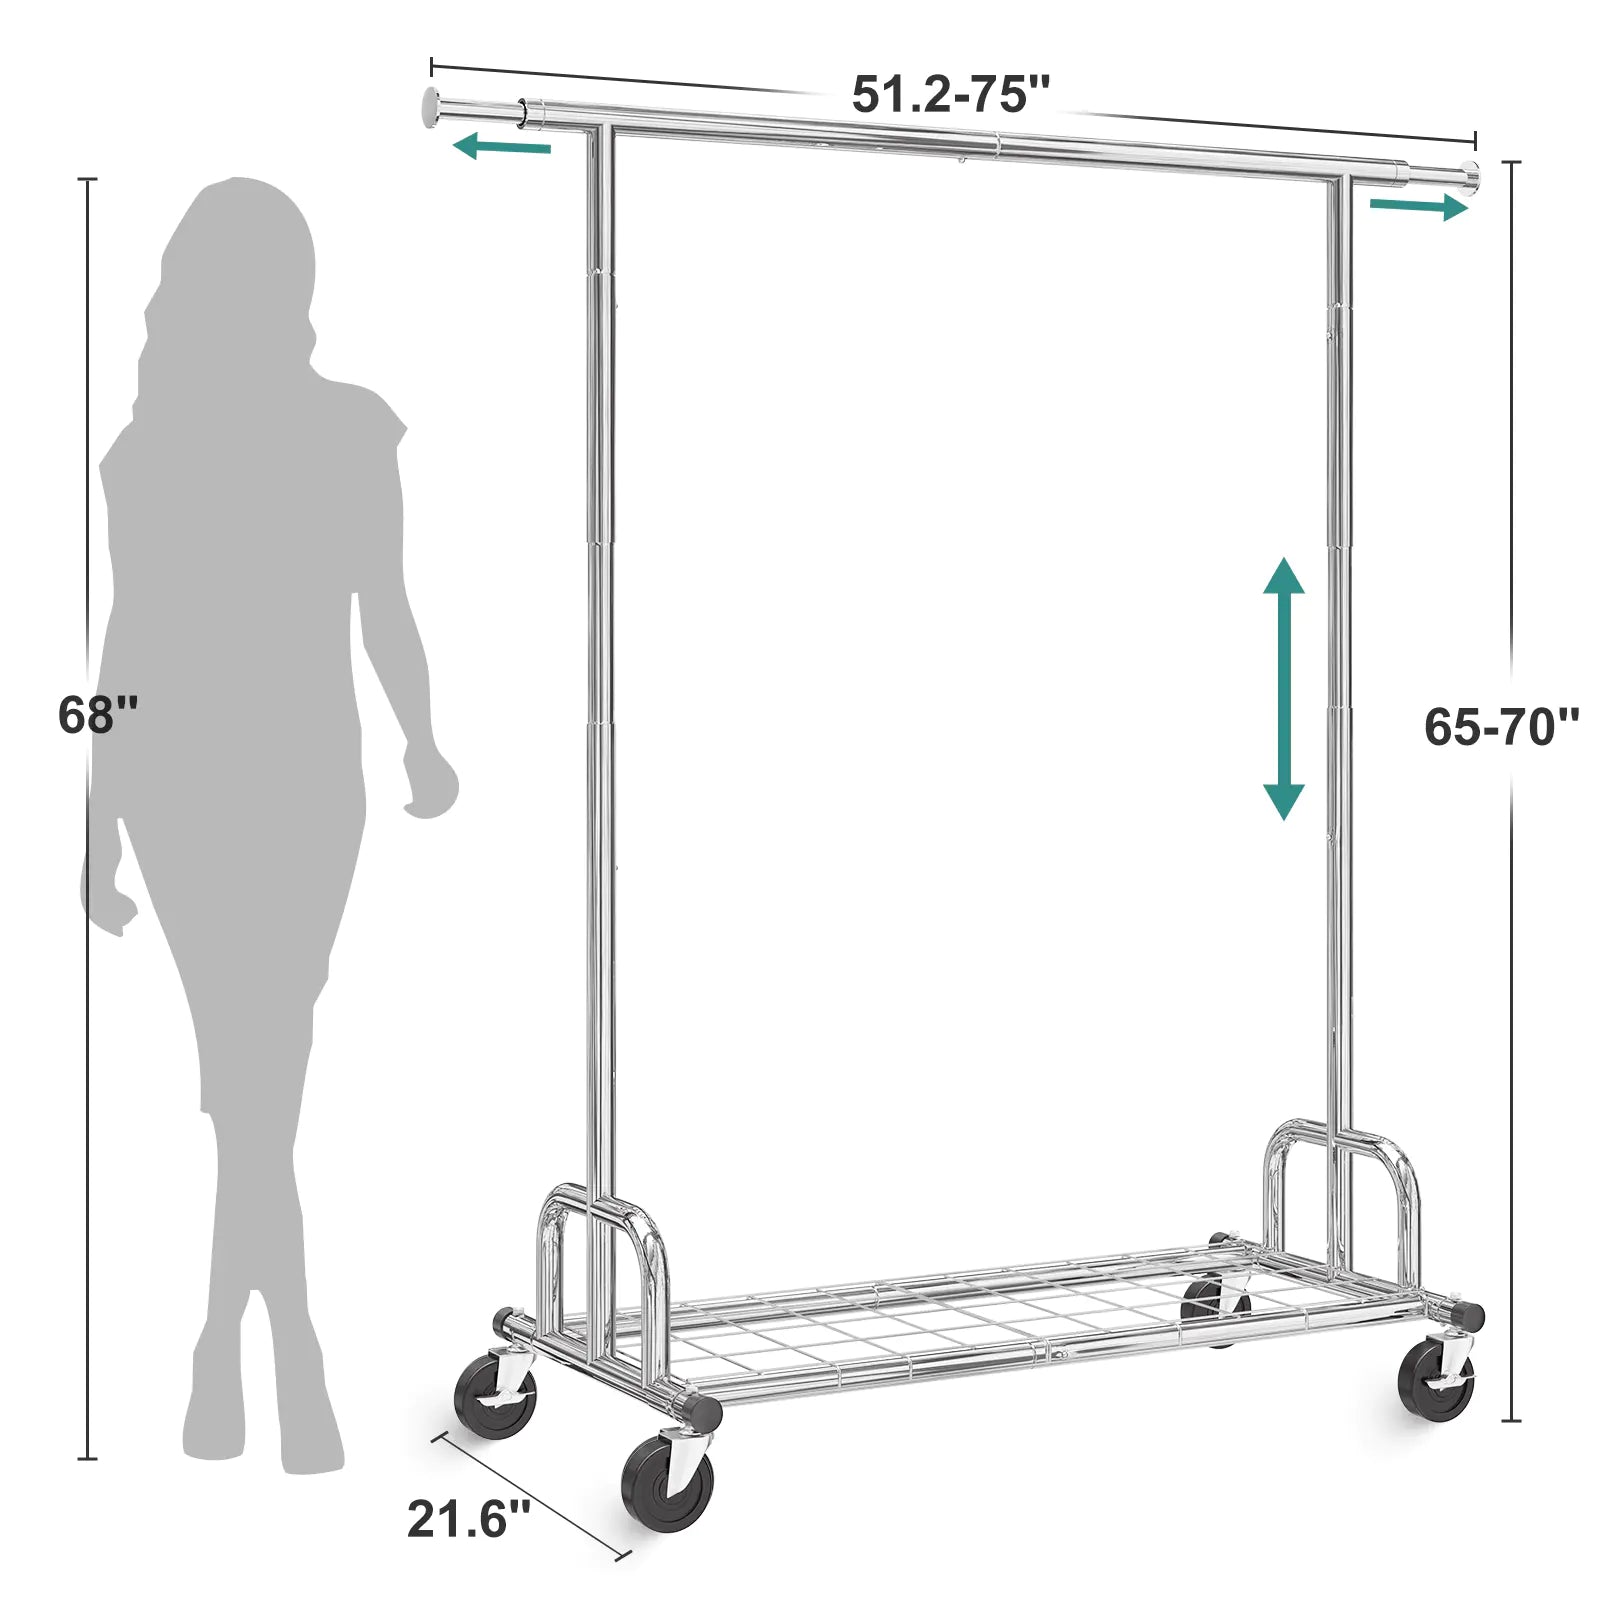 75"L x 21.6"W x 70"H retractable clothes rack with wheels makes more convenience